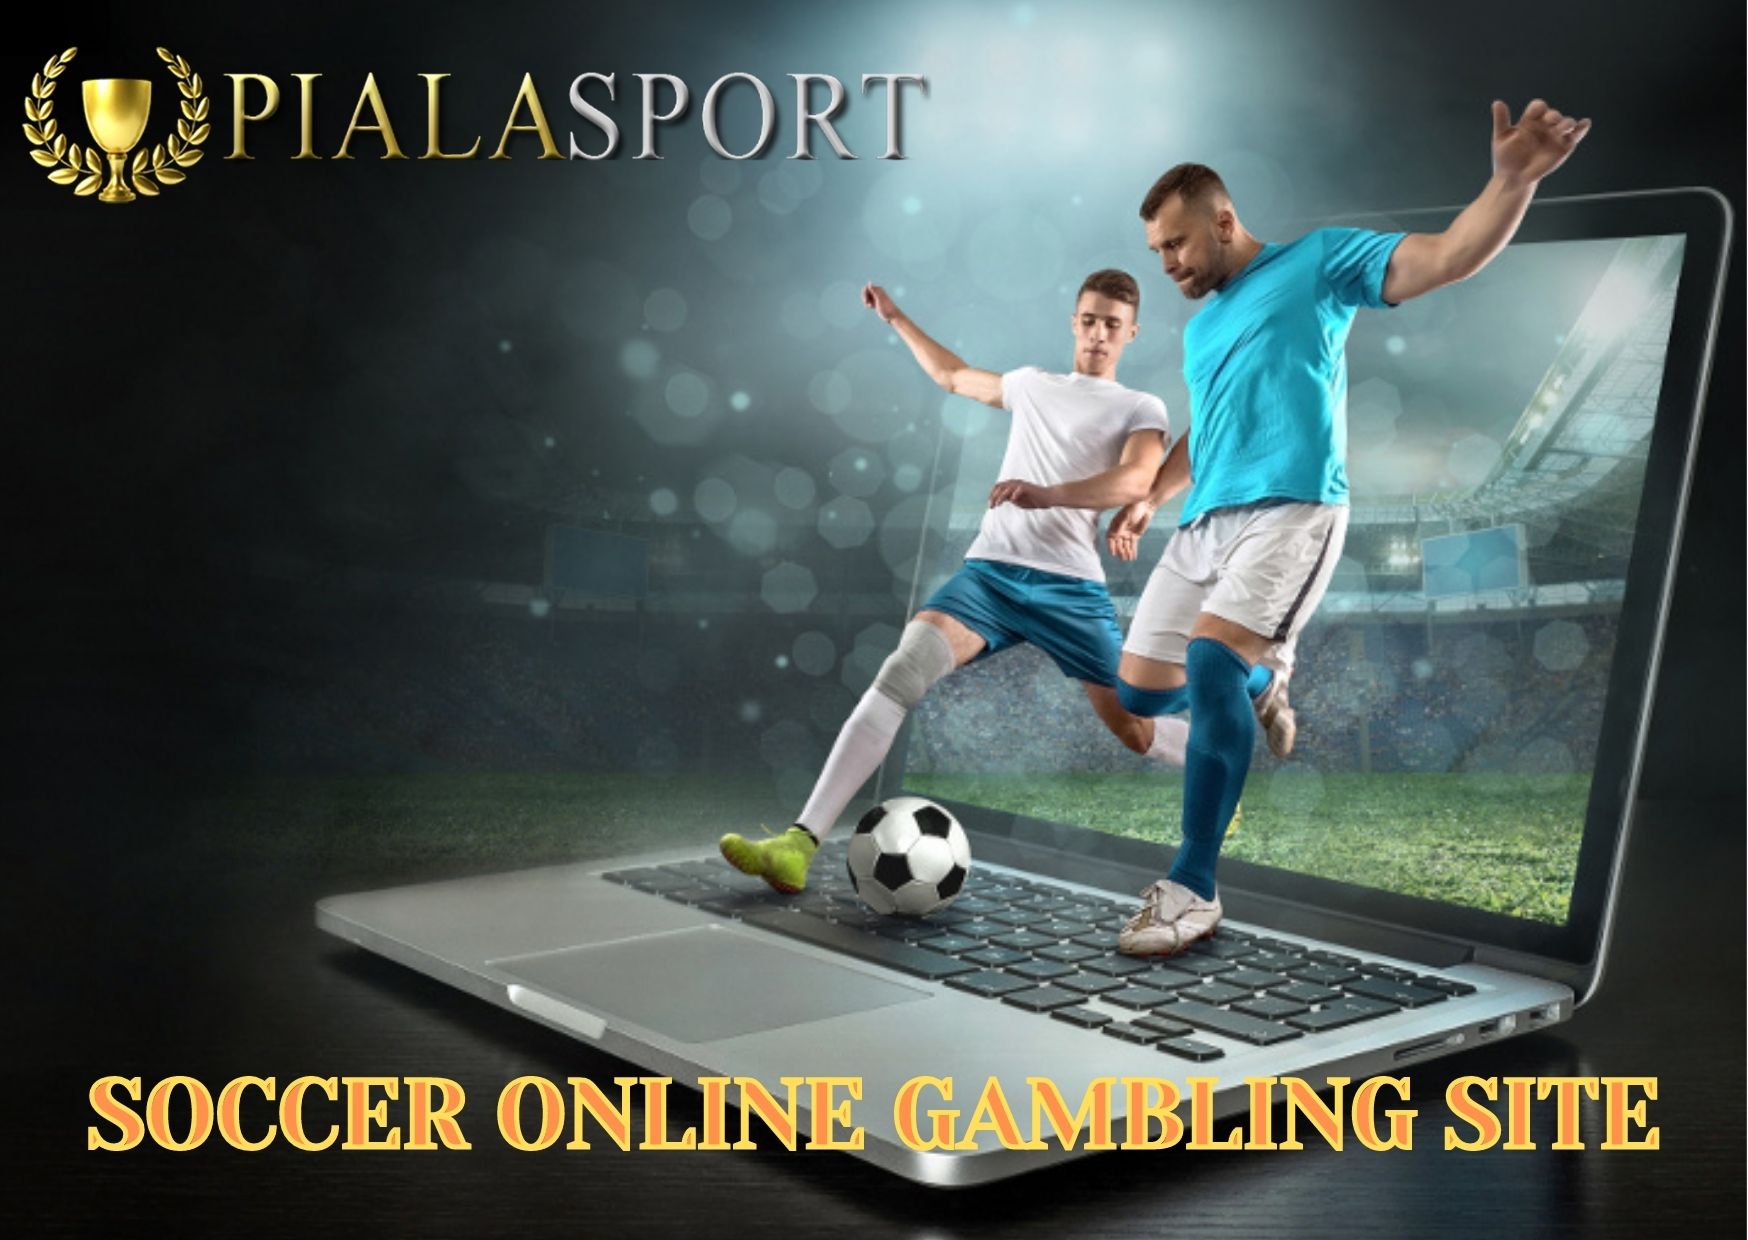 Let’s Join the Latest Soccer Gambling Site Pialasport